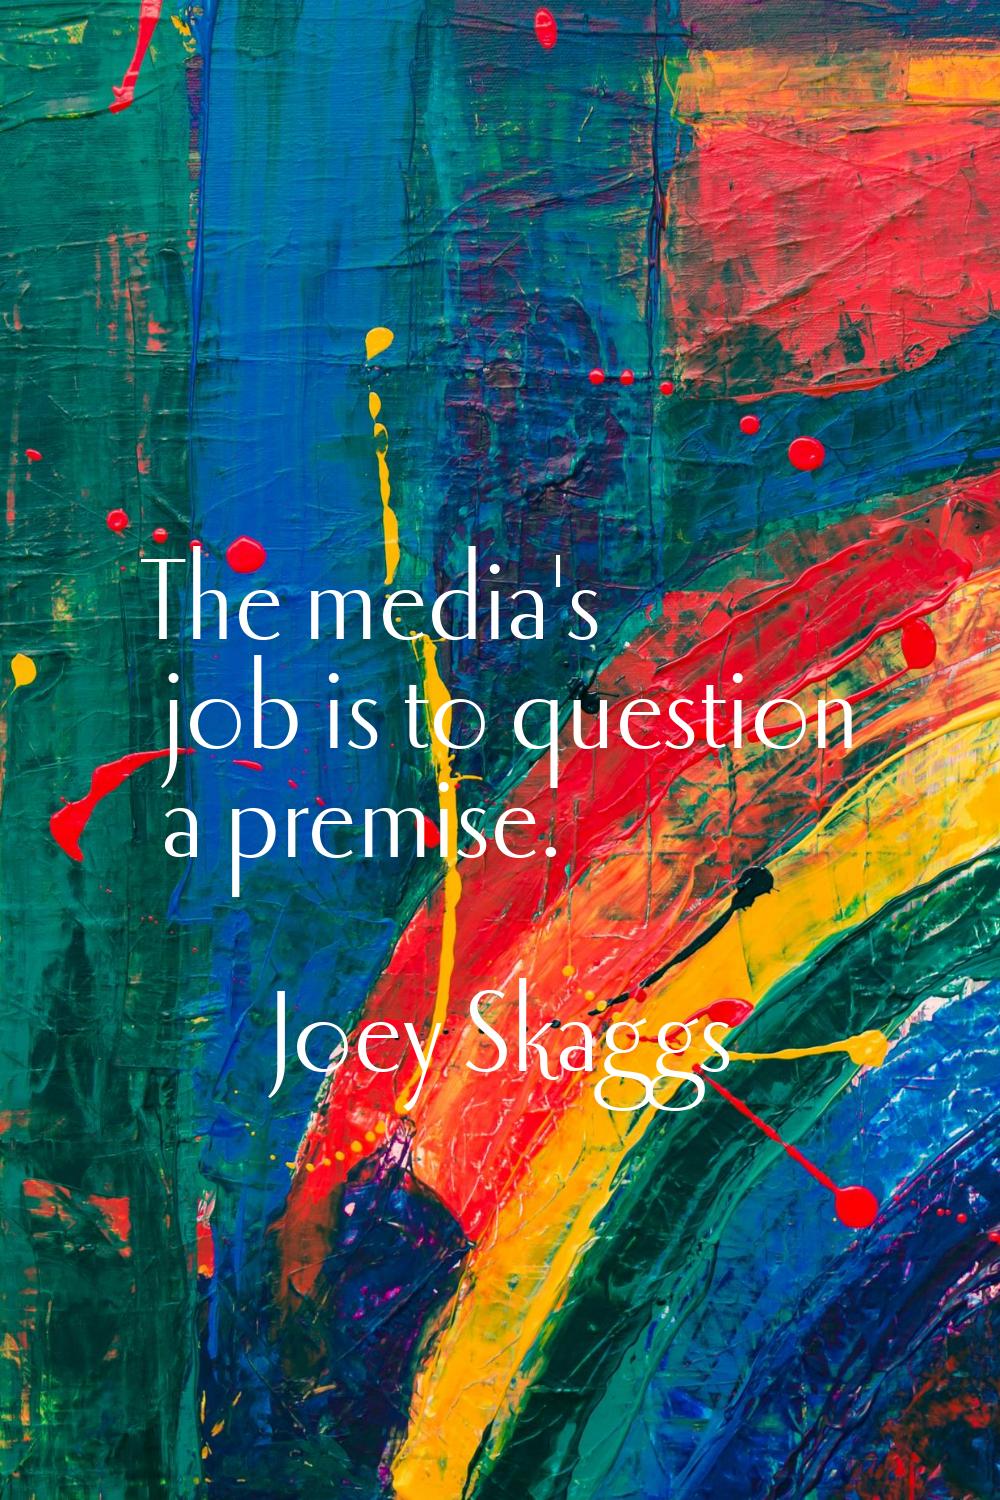 The media's job is to question a premise.